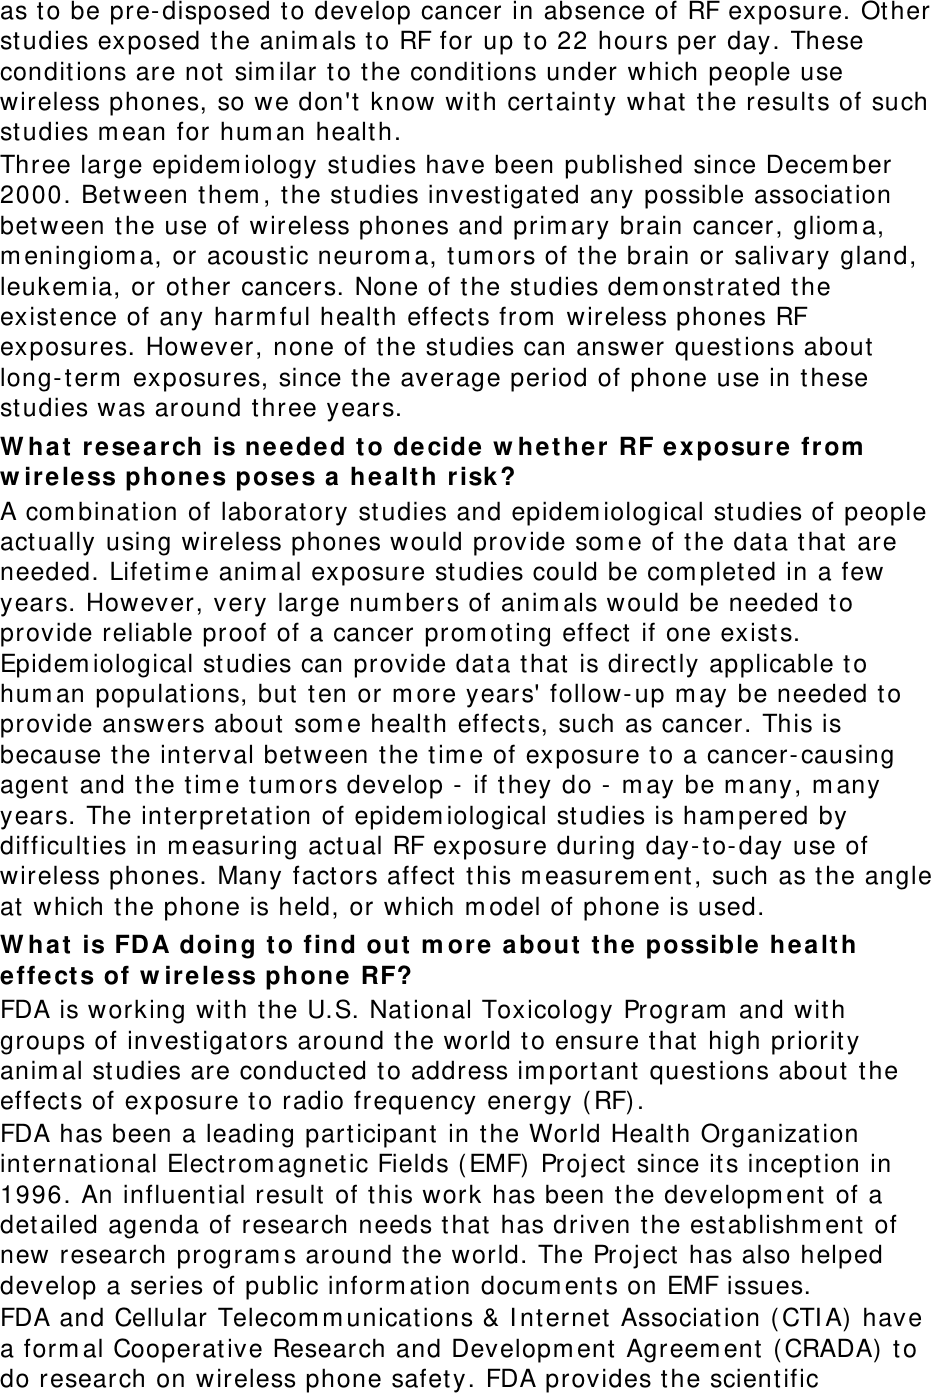 as to be pre- disposed to develop cancer in absence of RF exposure. Ot her studies exposed the anim als to RF for up to 22 hours per day. These conditions are not  sim ilar t o t he conditions under which people use wireless phones, so we don&apos;t know wit h cert ainty what the results of such studies m ean for hum an healt h. Three large epidem iology st udies have been published since Decem ber 2000. Between t hem , the st udies investigat ed any possible association bet ween t he use of wireless phones and prim ary brain cancer, gliom a, m eningiom a, or acoust ic neurom a, t um ors of t he brain or salivary gland, leukem ia, or ot her cancers. None of t he st udies dem onst rated the existence of any harm ful health effect s from  wireless phones RF exposures. However, none of t he st udies can answer questions about  long- t erm  exposures, since the average period of phone use in t hese studies was around three years. W hat  research is nee ded to de cide  w he t her  RF e xposure  from  w ireless phones poses a  he a lt h risk? A com bination of laboratory st udies and epidem iological st udies of people act ually using wireless phones would provide som e of t he dat a t hat  are needed. Lifet im e anim al exposure studies could be com plet ed in a few years. However, very large num bers of anim als would be needed to provide reliable proof of a cancer prom ot ing effect  if one exists. Epidem iological studies can provide dat a that is direct ly applicable t o hum an populations, but t en or m ore years&apos; follow- up m ay be needed t o provide answers about som e health effect s, such as cancer. This is because the interval between t he tim e of exposure to a cancer- causing agent and t he tim e tum ors develop - if t hey do -  m ay be m any, m any years. The interpret ation of epidem iological st udies is ham pered by difficulties in m easuring act ual RF exposure during day- t o-day use of wireless phones. Many fact ors affect  this m easurem ent, such as t he angle at  which the phone is held, or which m odel of phone is used. W hat  is FDA doing t o find out  m or e about  t he  possible health effe ct s of w ire less phone  RF? FDA is working with t he U.S. National Toxicology Program  and with groups of invest igators around the world to ensure that high priority anim al st udies are conduct ed t o address im portant  quest ions about t he effect s of exposure to radio frequency energy ( RF) . FDA has been a leading participant in t he World Health Organizat ion international Elect rom agnet ic Fields ( EMF) Proj ect  since its incept ion in 1996. An influential result  of t his work has been t he developm ent  of a det ailed agenda of research needs t hat has driven t he est ablishm ent  of new research program s around the world. The Project  has also helped develop a series of public inform ation docum ents on EMF issues. FDA and Cellular Telecom m unications &amp; I nternet Association ( CTI A)  have a form al Cooperative Research and Developm ent  Agreem ent ( CRADA)  to do research on wireless phone safet y. FDA provides t he scient ific 